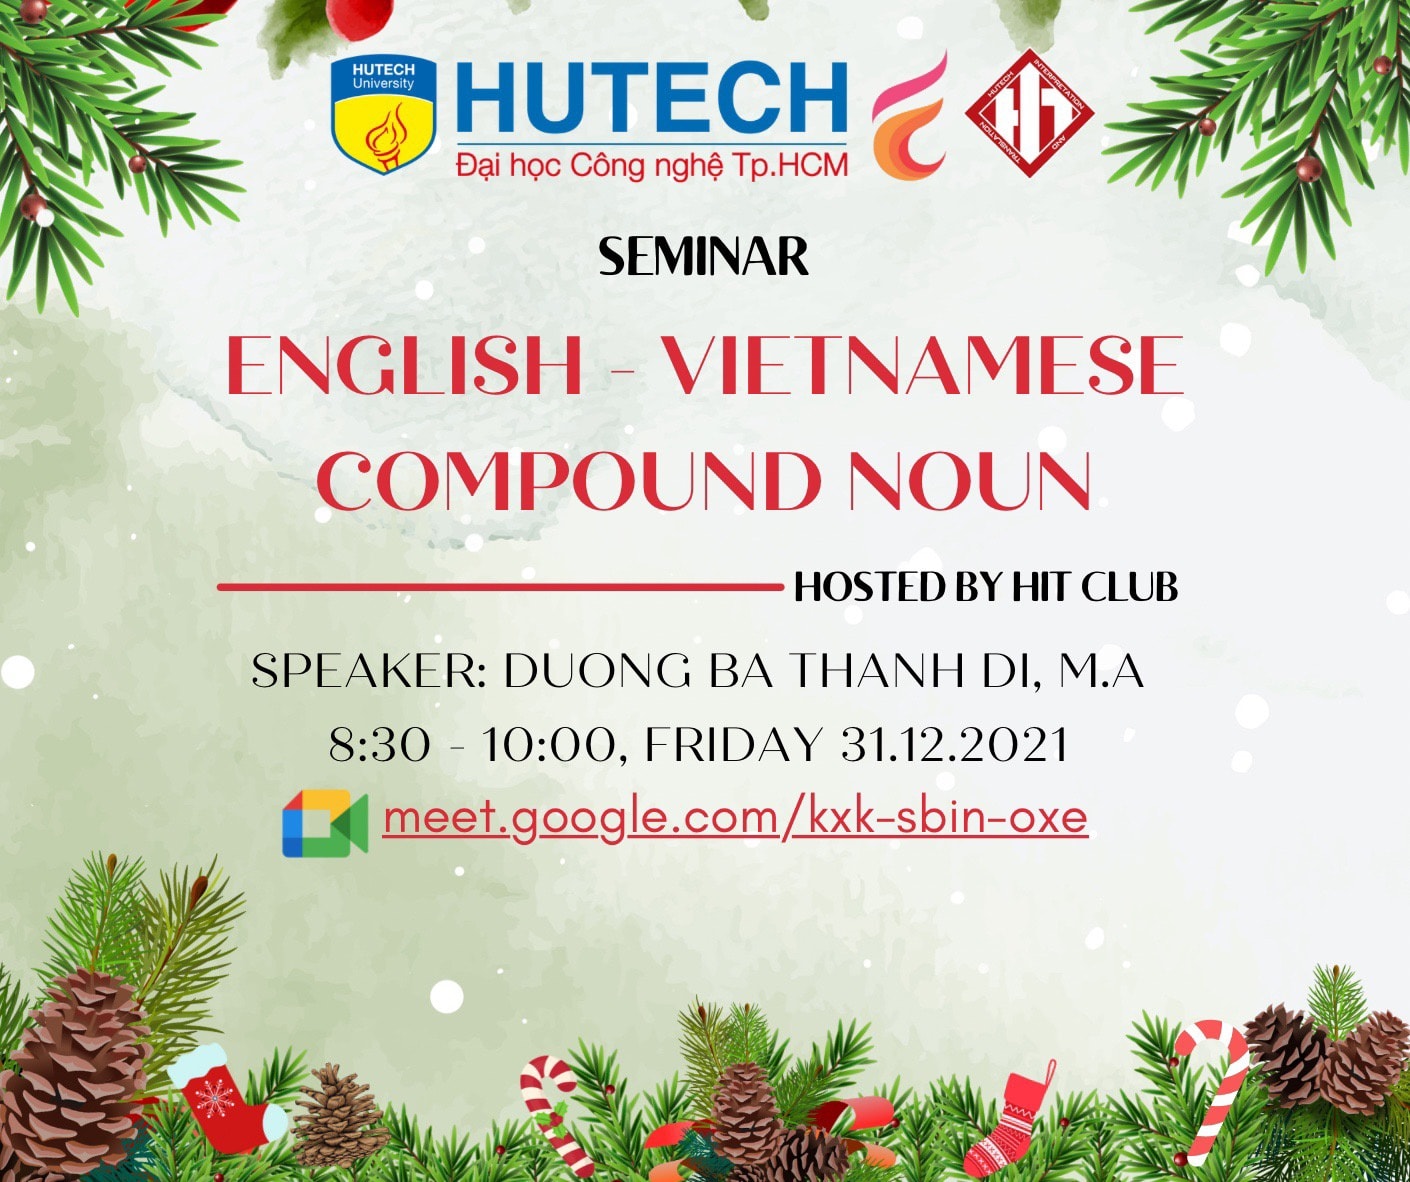 Seminars on  How to "crush" reading comprehension  and  “English – Vietnamese Compound Nouns” 20